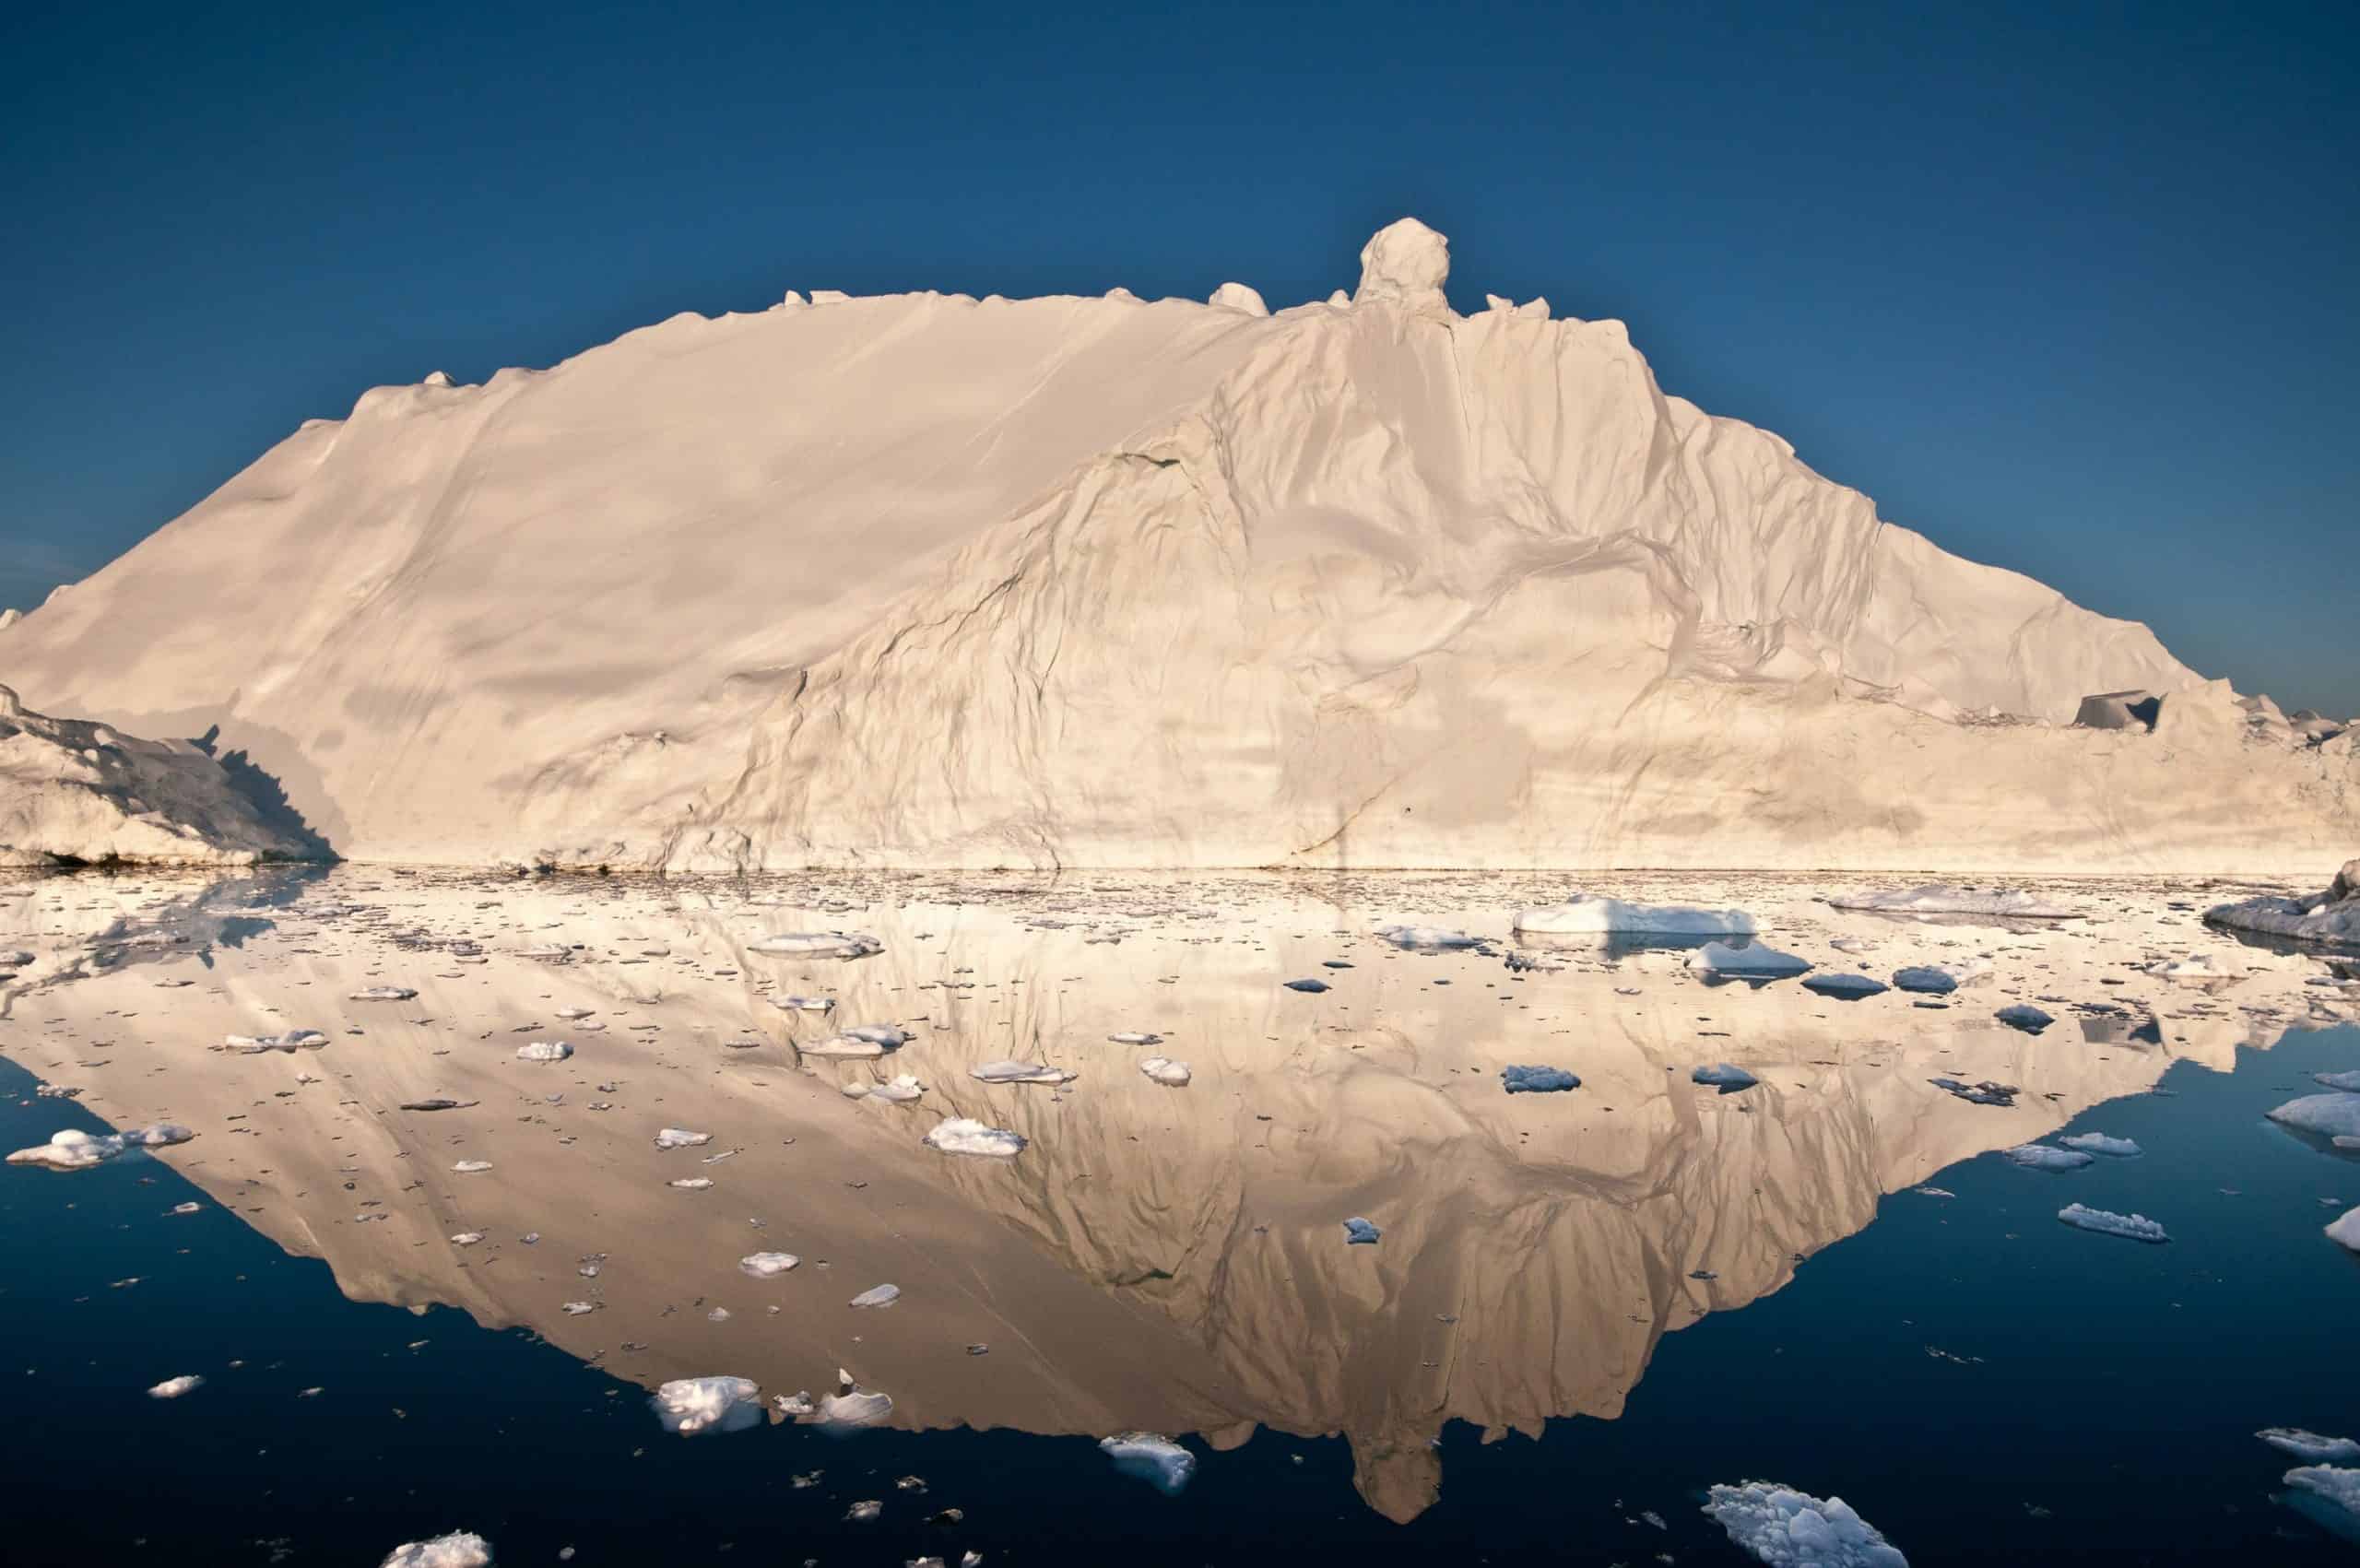 Global warming sparks loss of 28 trillion tonnes of ice in 26 years